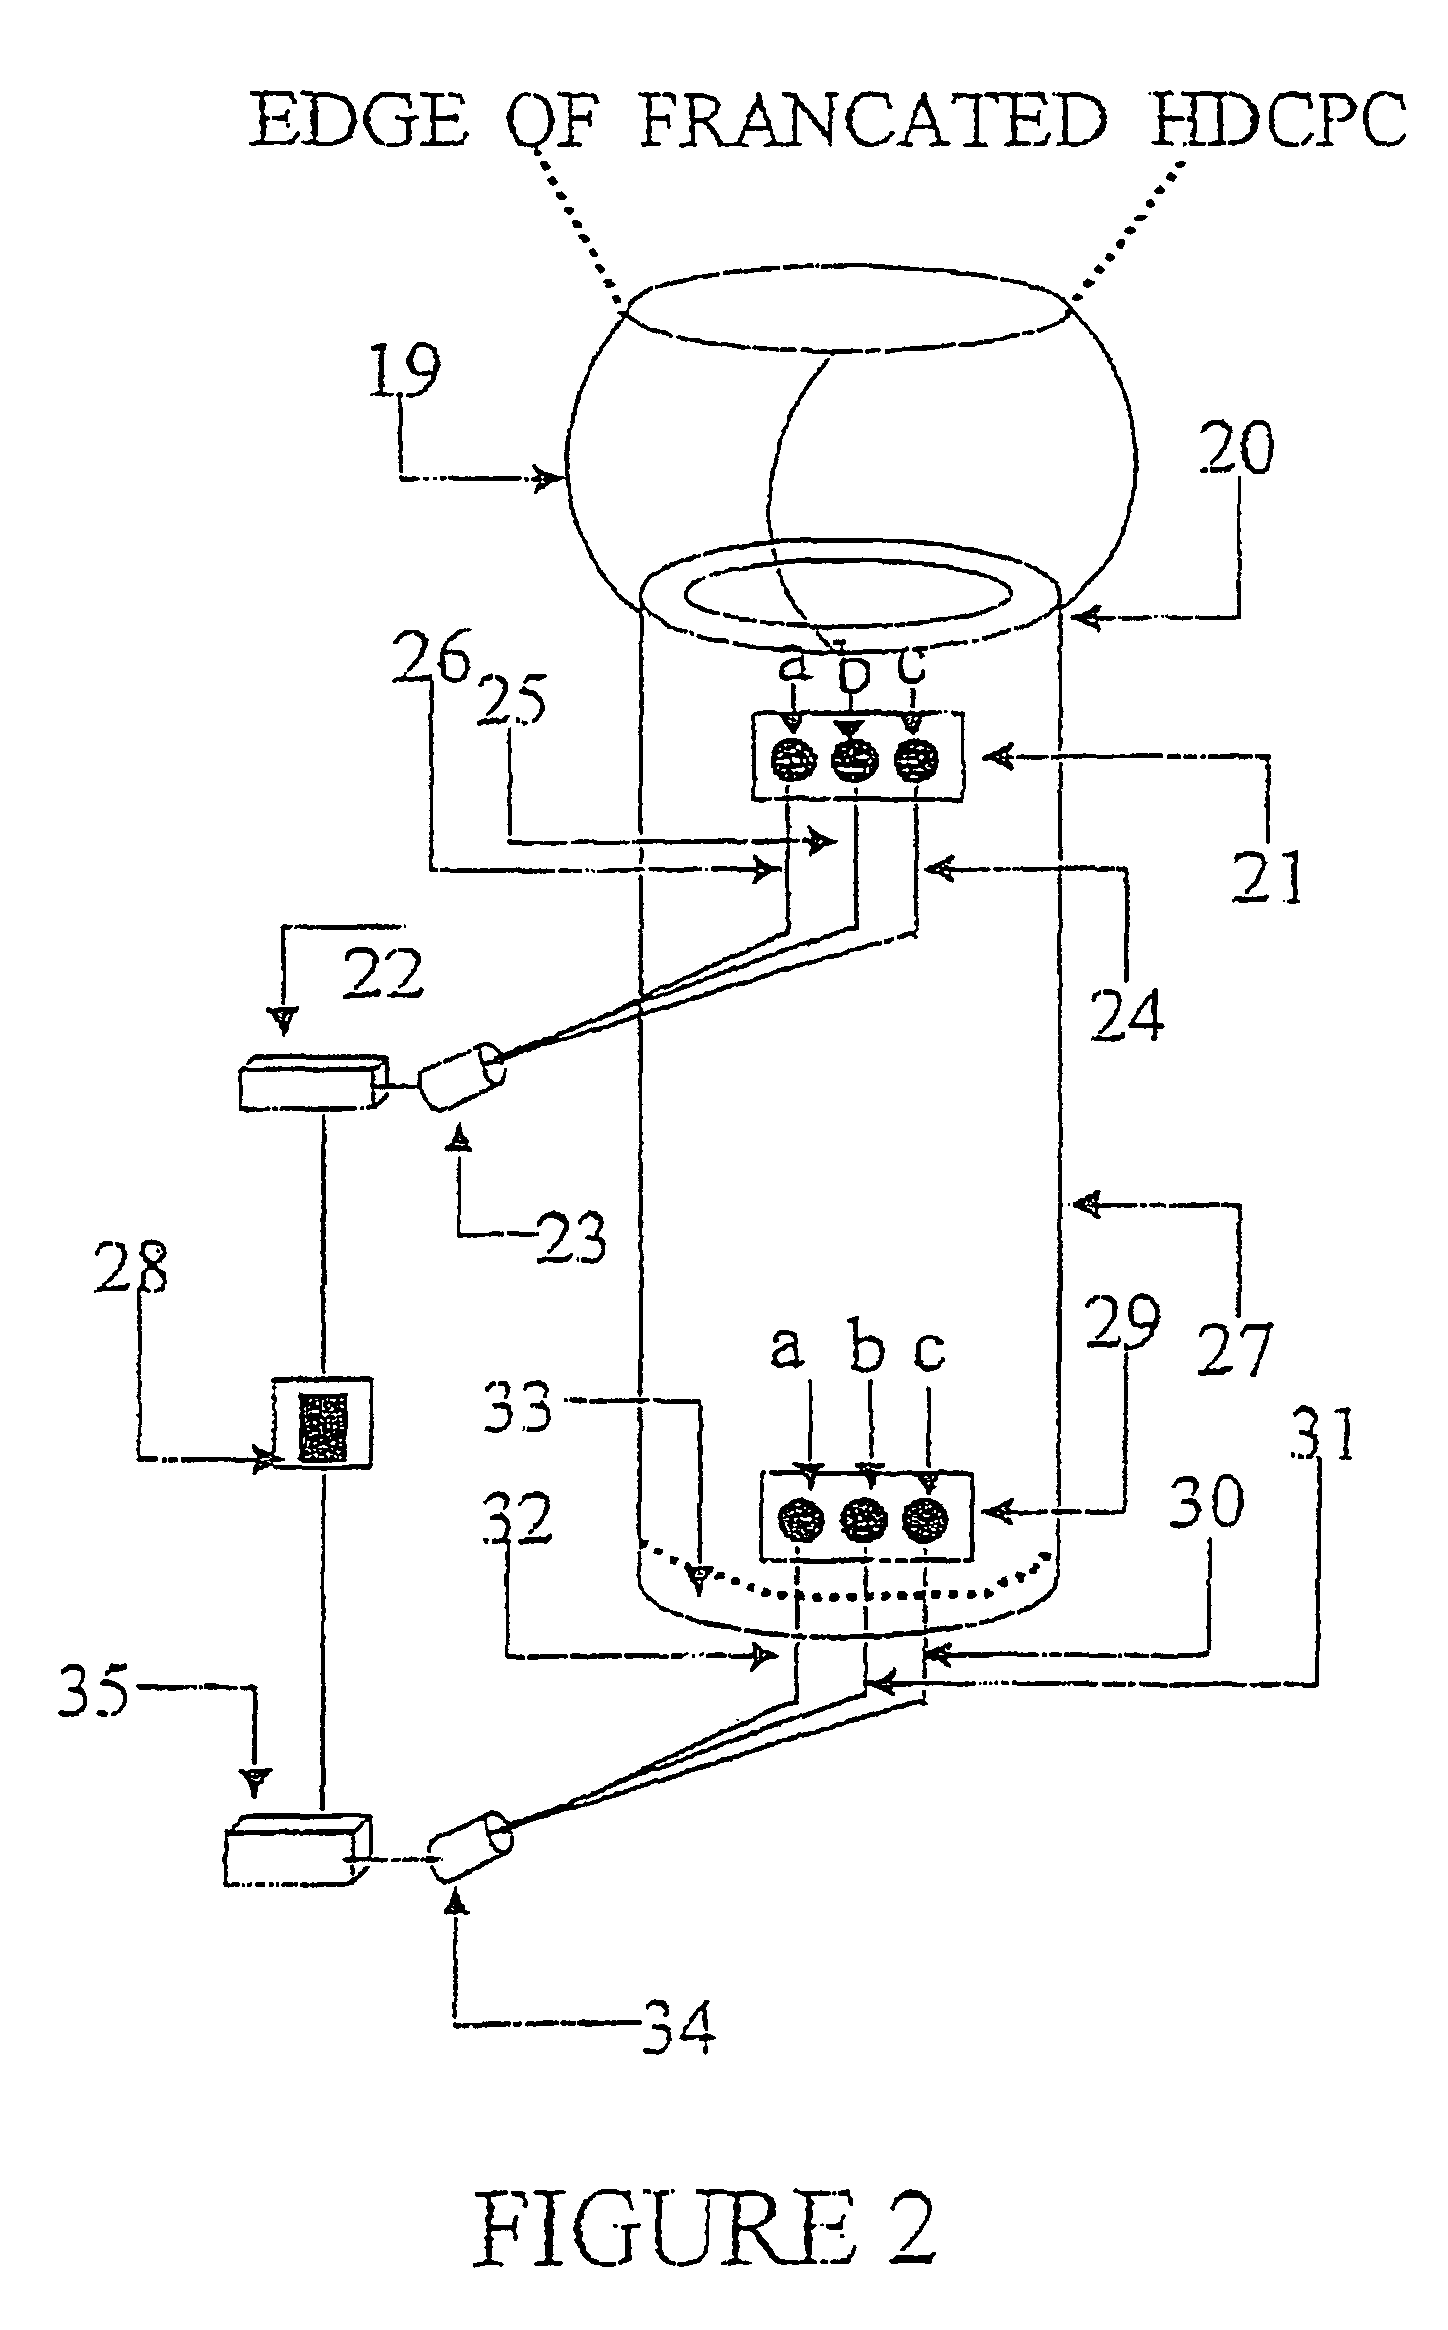 Method and device for disinfecting and purifying liquids and gasses